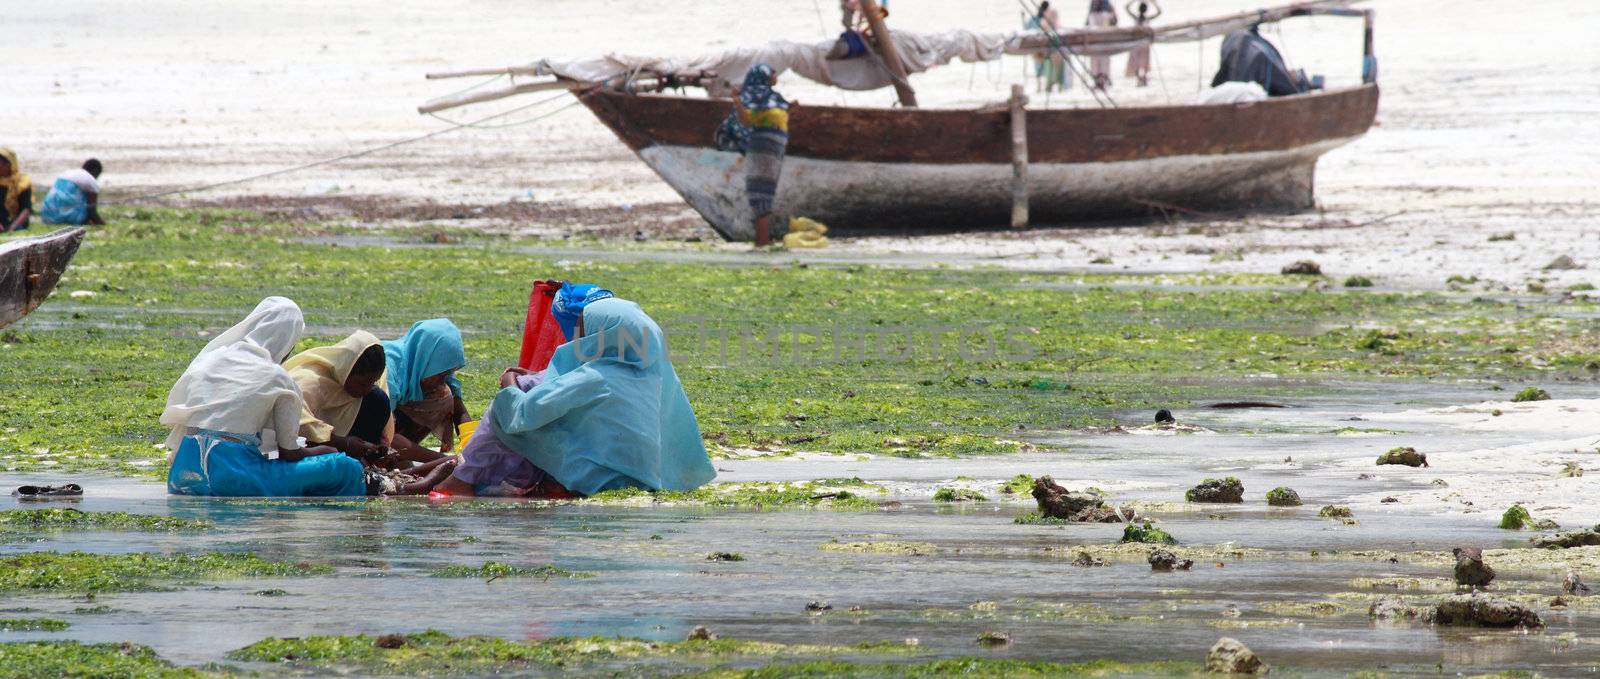 Women and children with colorful clothes looking for shellfishes in Zanzibar